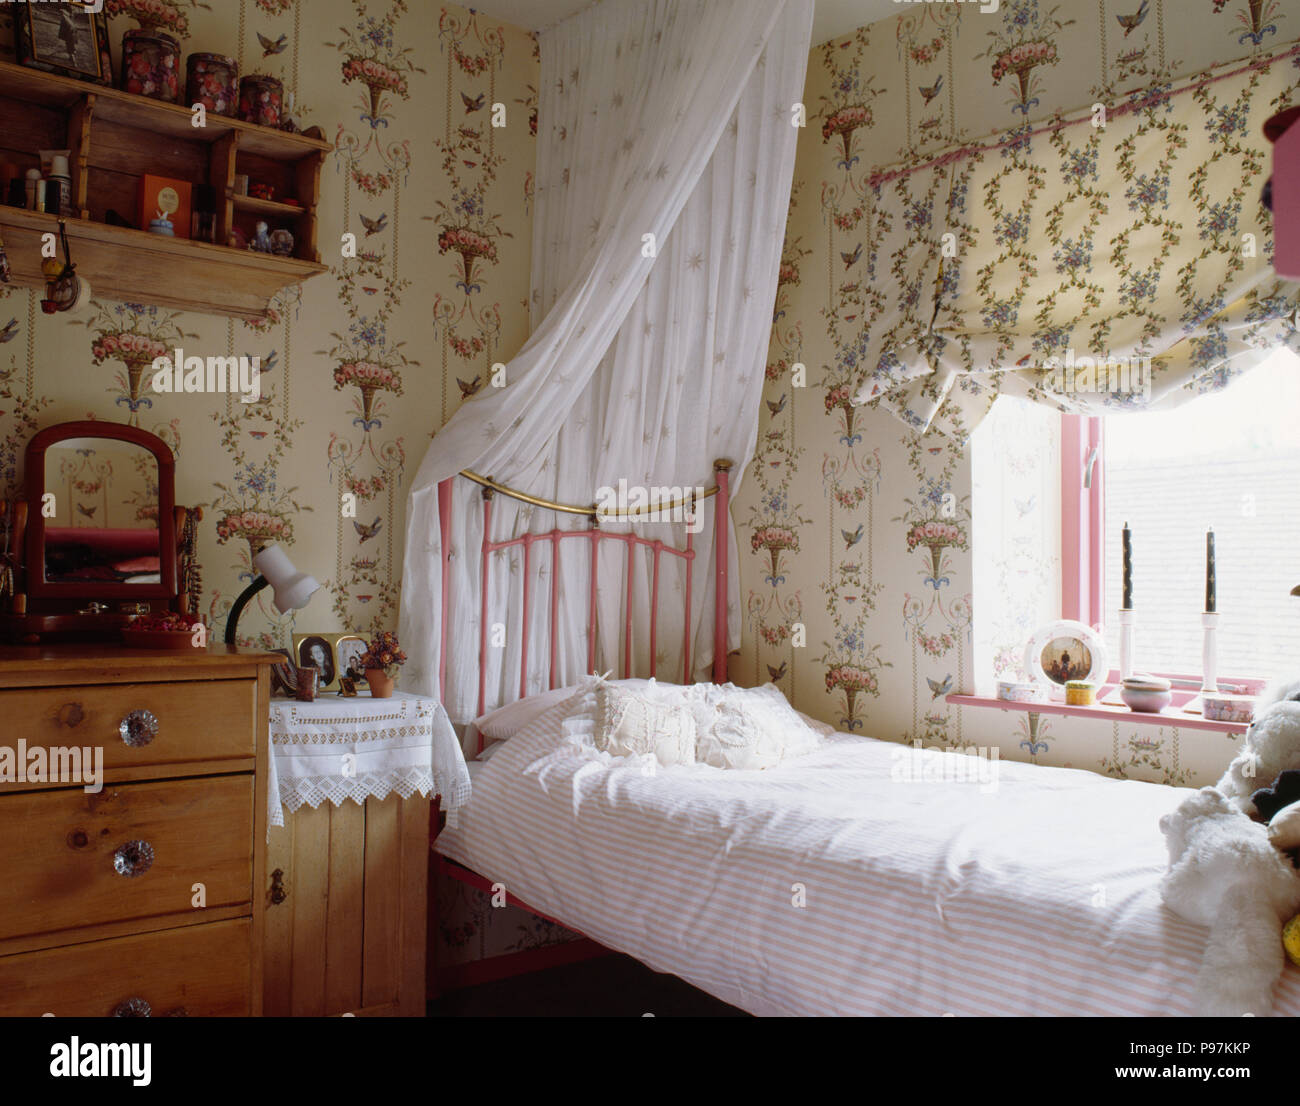 Patterned wallpaper and blind in teenager girls bedroom with white drapes  on pink single brass bed Stock Photo - Alamy